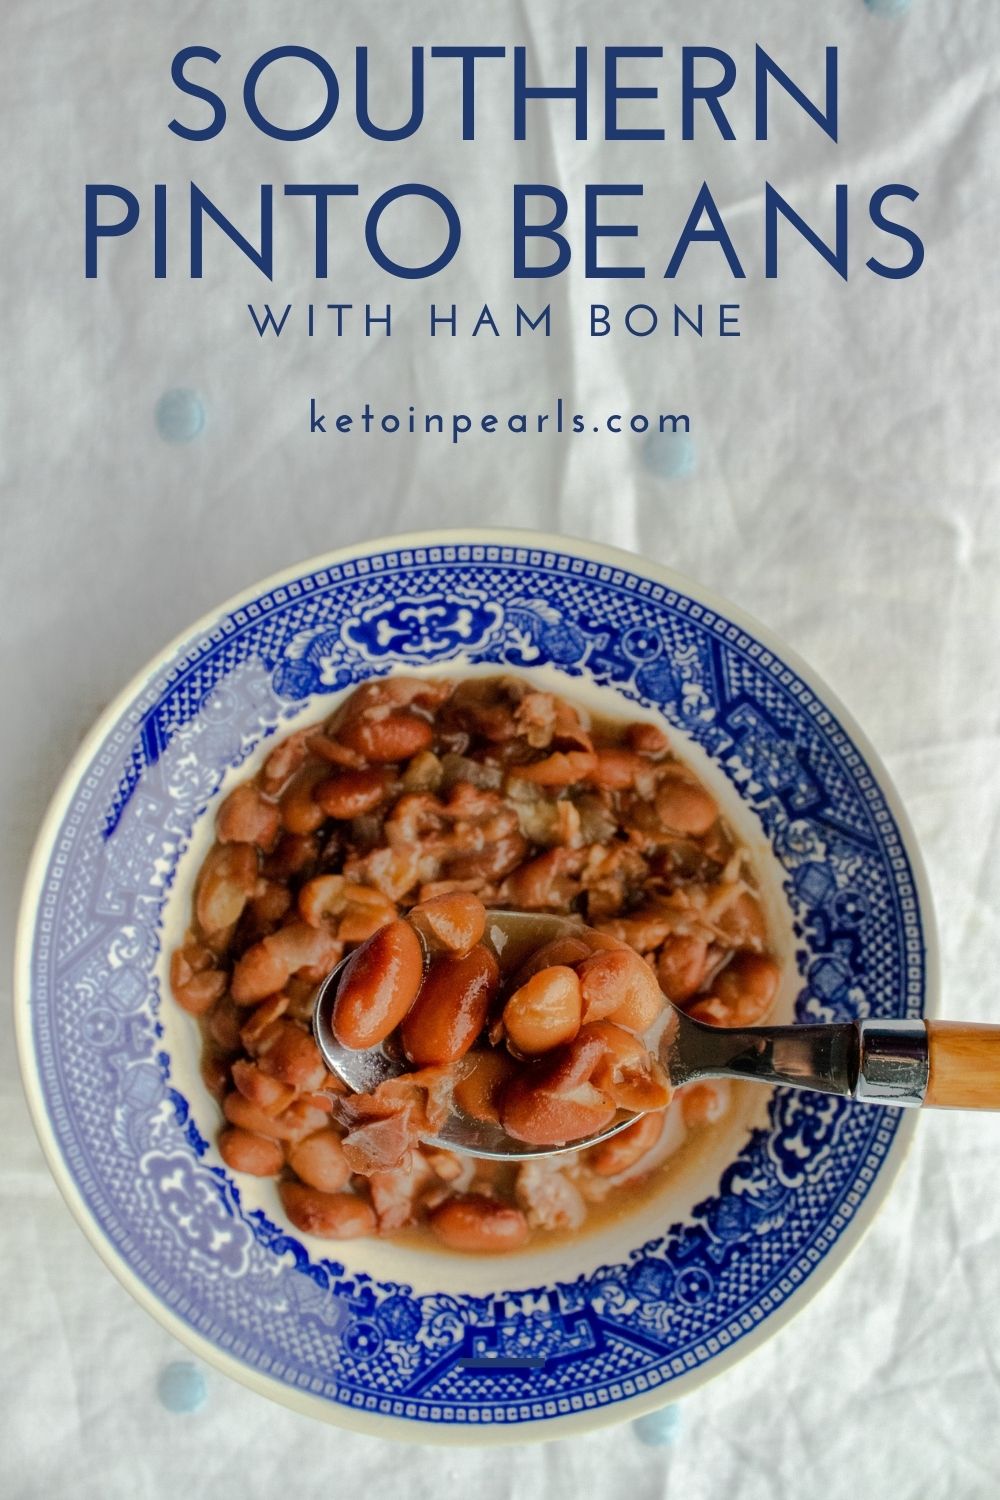 Soup beans, or southern pinto beans, are the perfect way to use up a leftover hamhock. This blog post will walk you through making the best ham and bean soup using your Instant Pot. If you've never cooked dry beans before, fear not, this post is just for you!